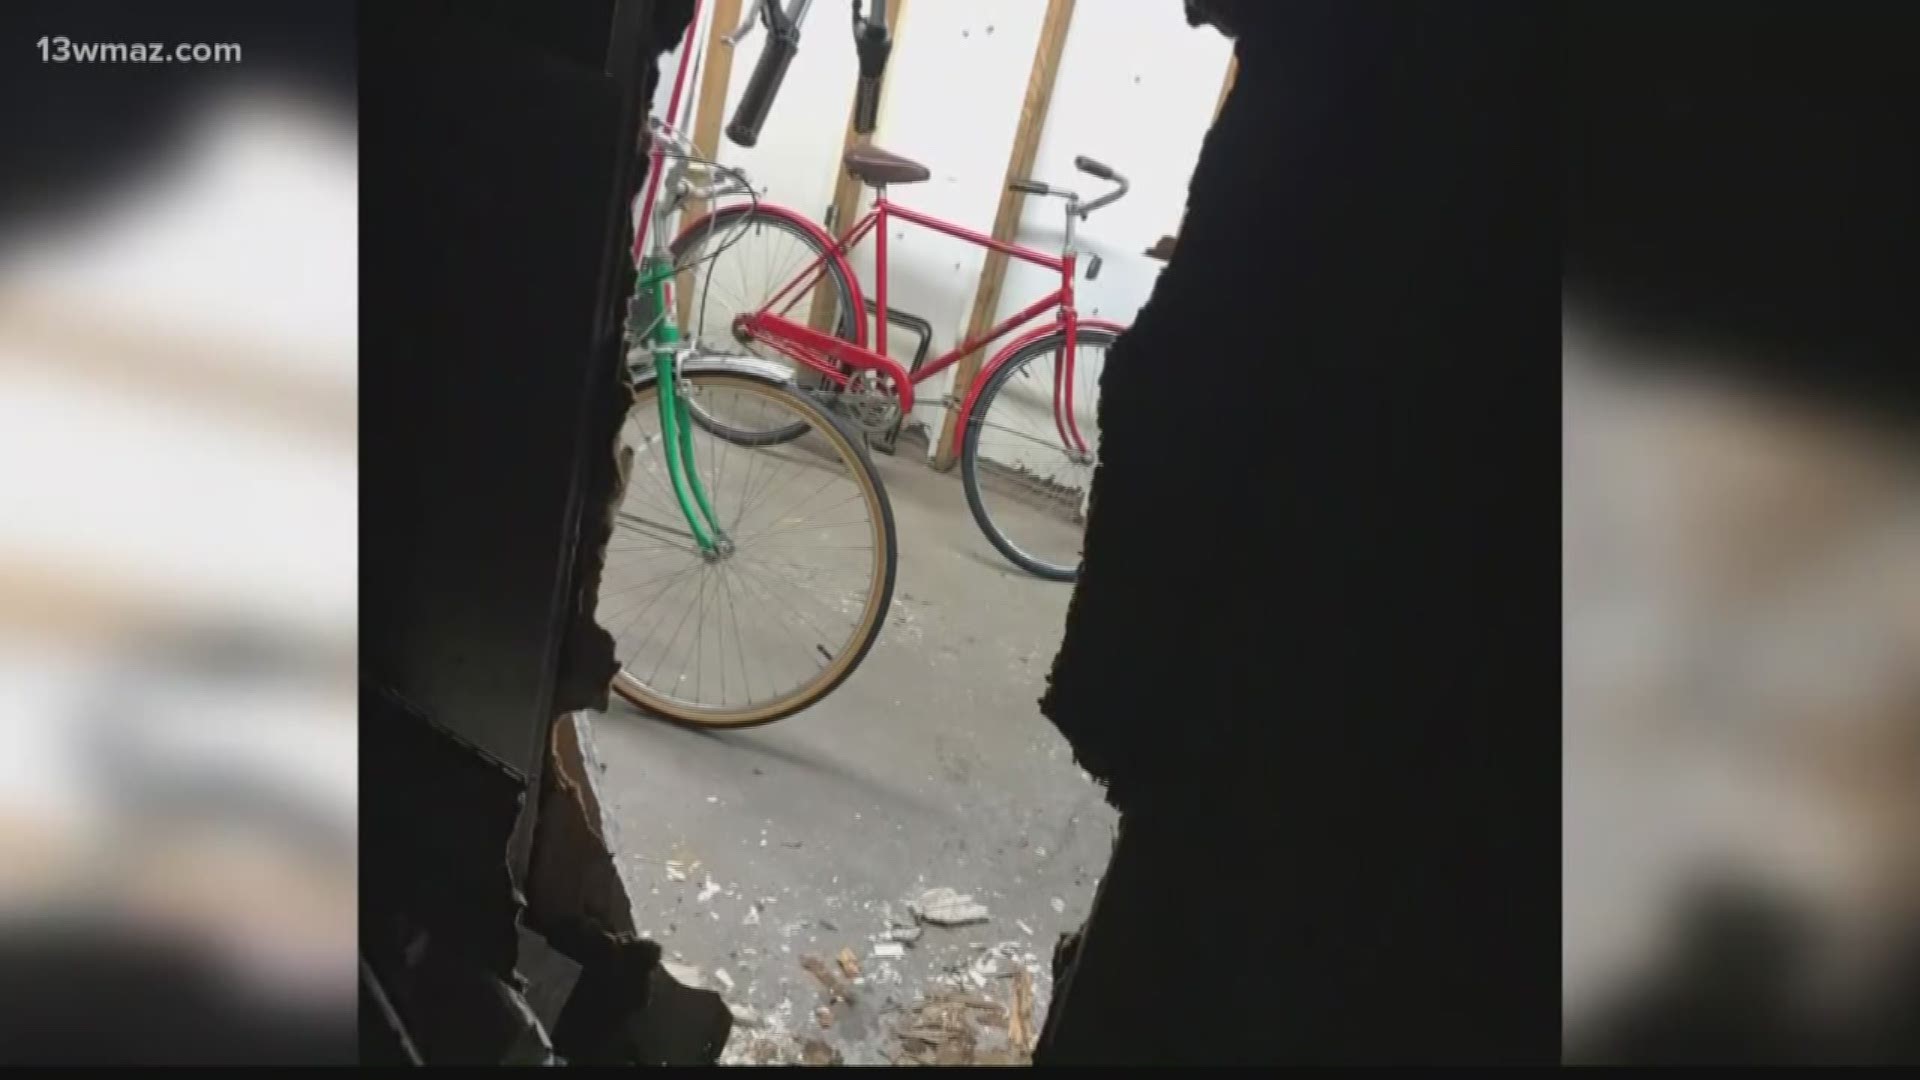 Somebody broke into Bike Tech Macon overnight and made off with maybe as much as $2,000 worth of goods and cash.